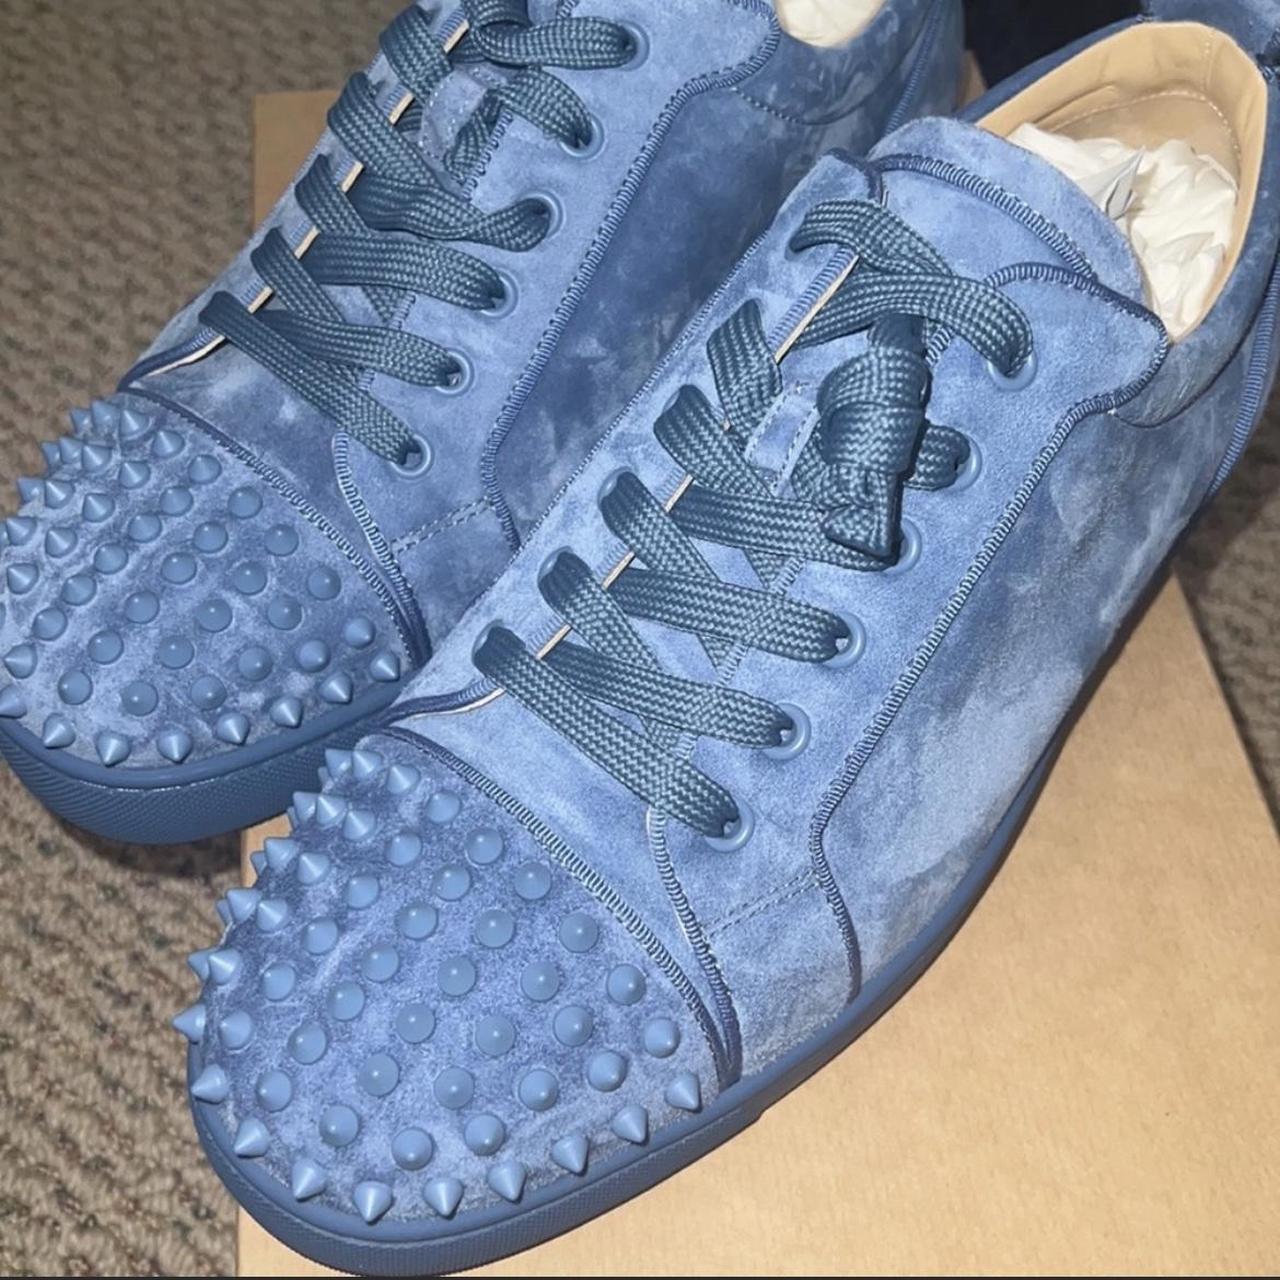 Christian Louboutin Men's Blue Trainers & Athletic Shoes